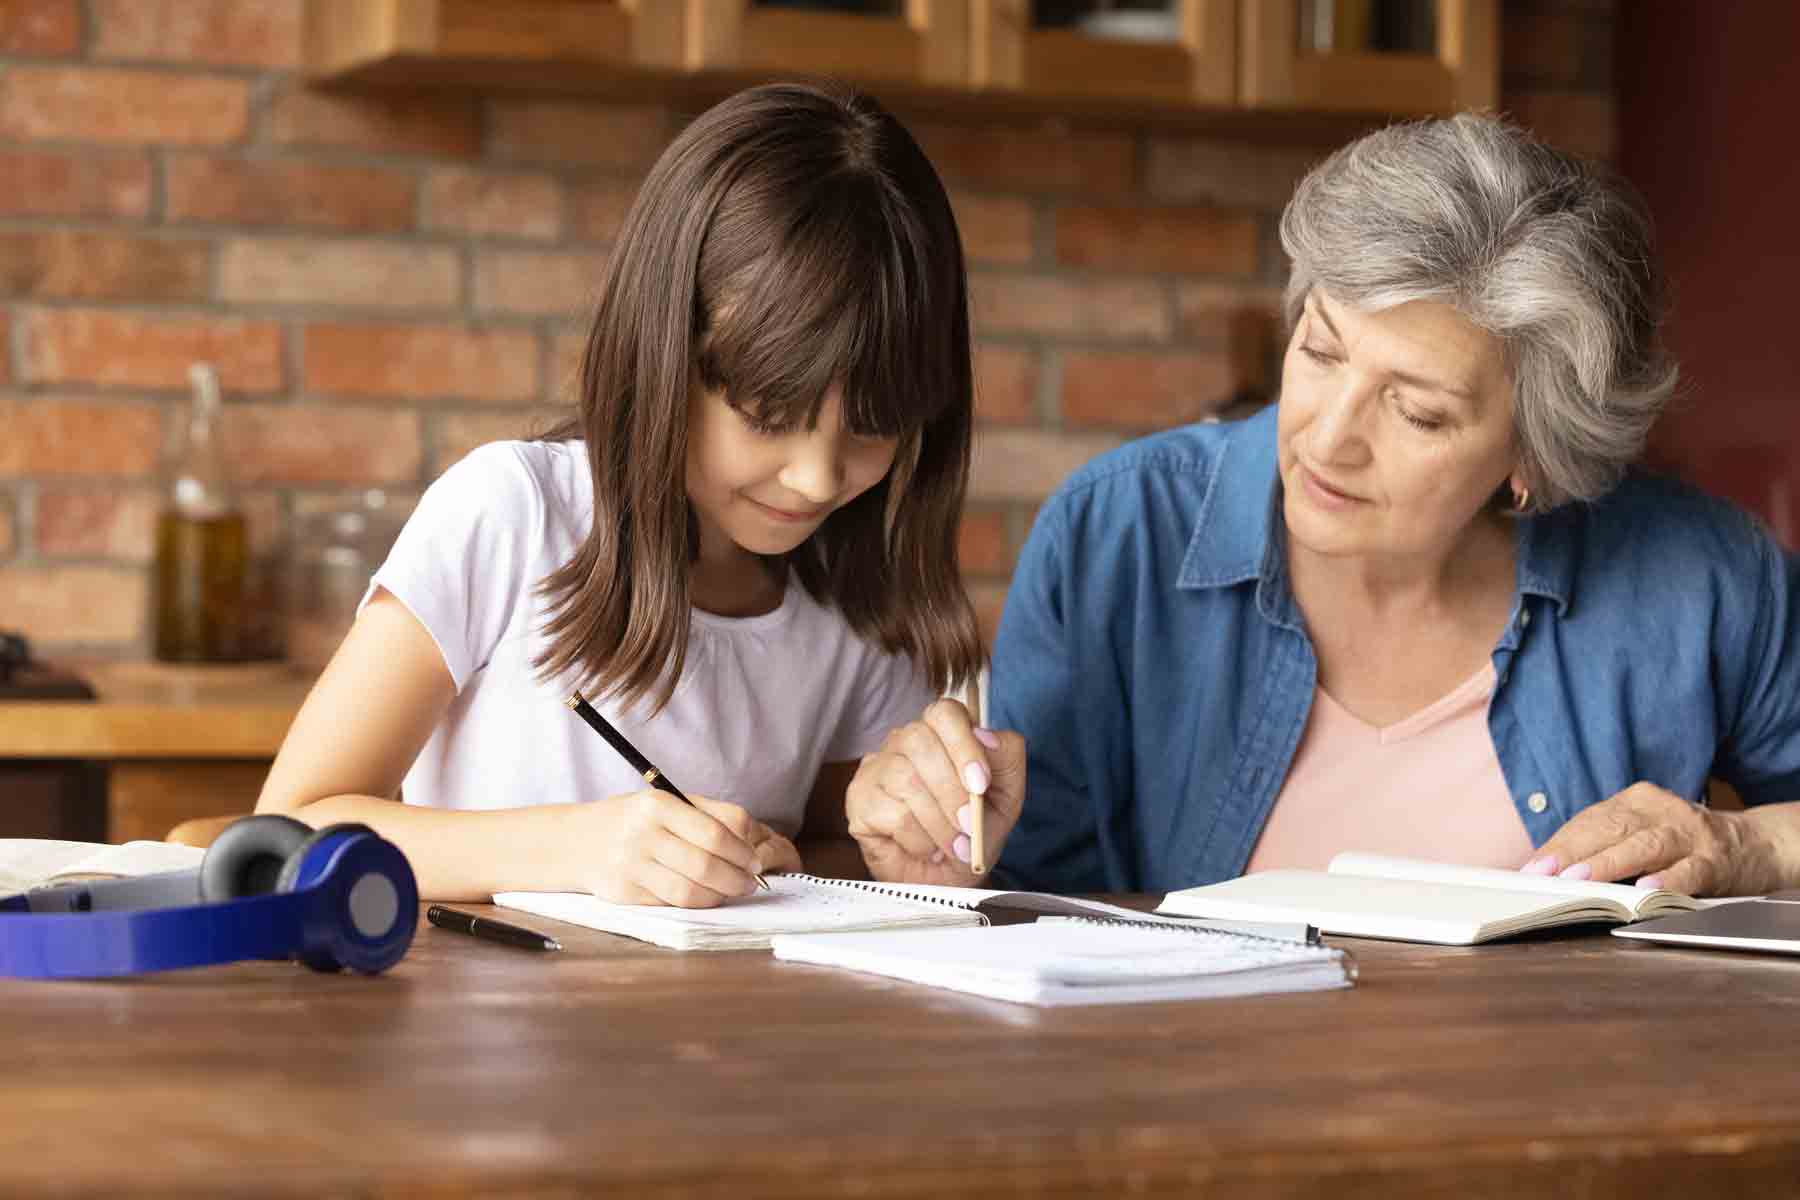 A private homeschool teacher instructing a young student.